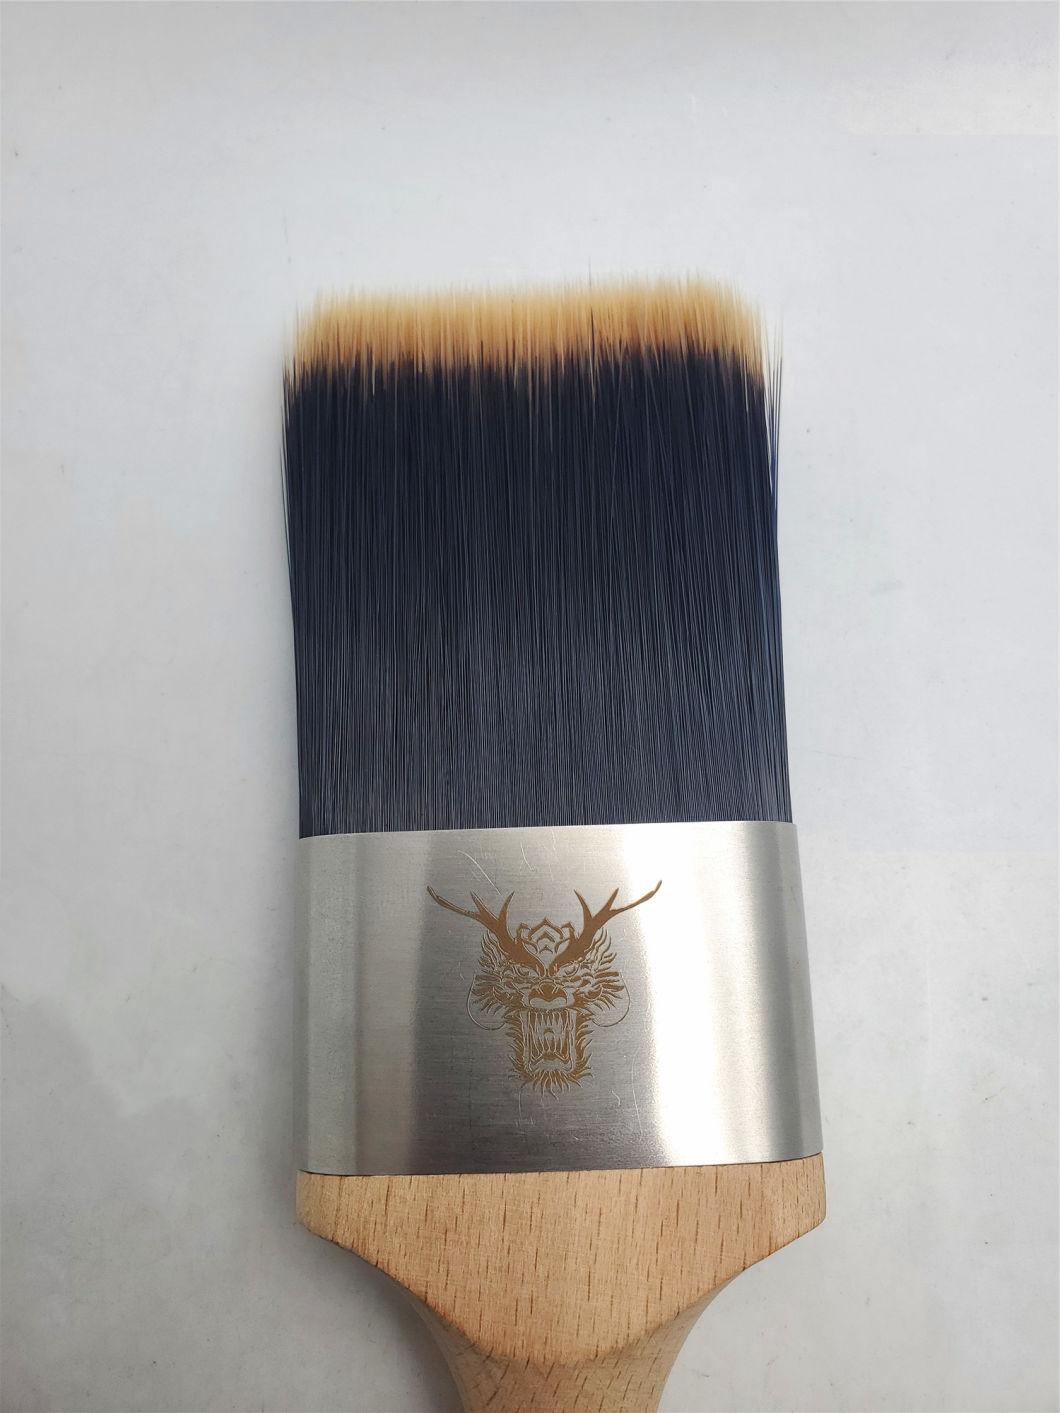 Chopand-Brushes for Cabinet Decks Fences Interior Exterior & Commercial Paintbrush